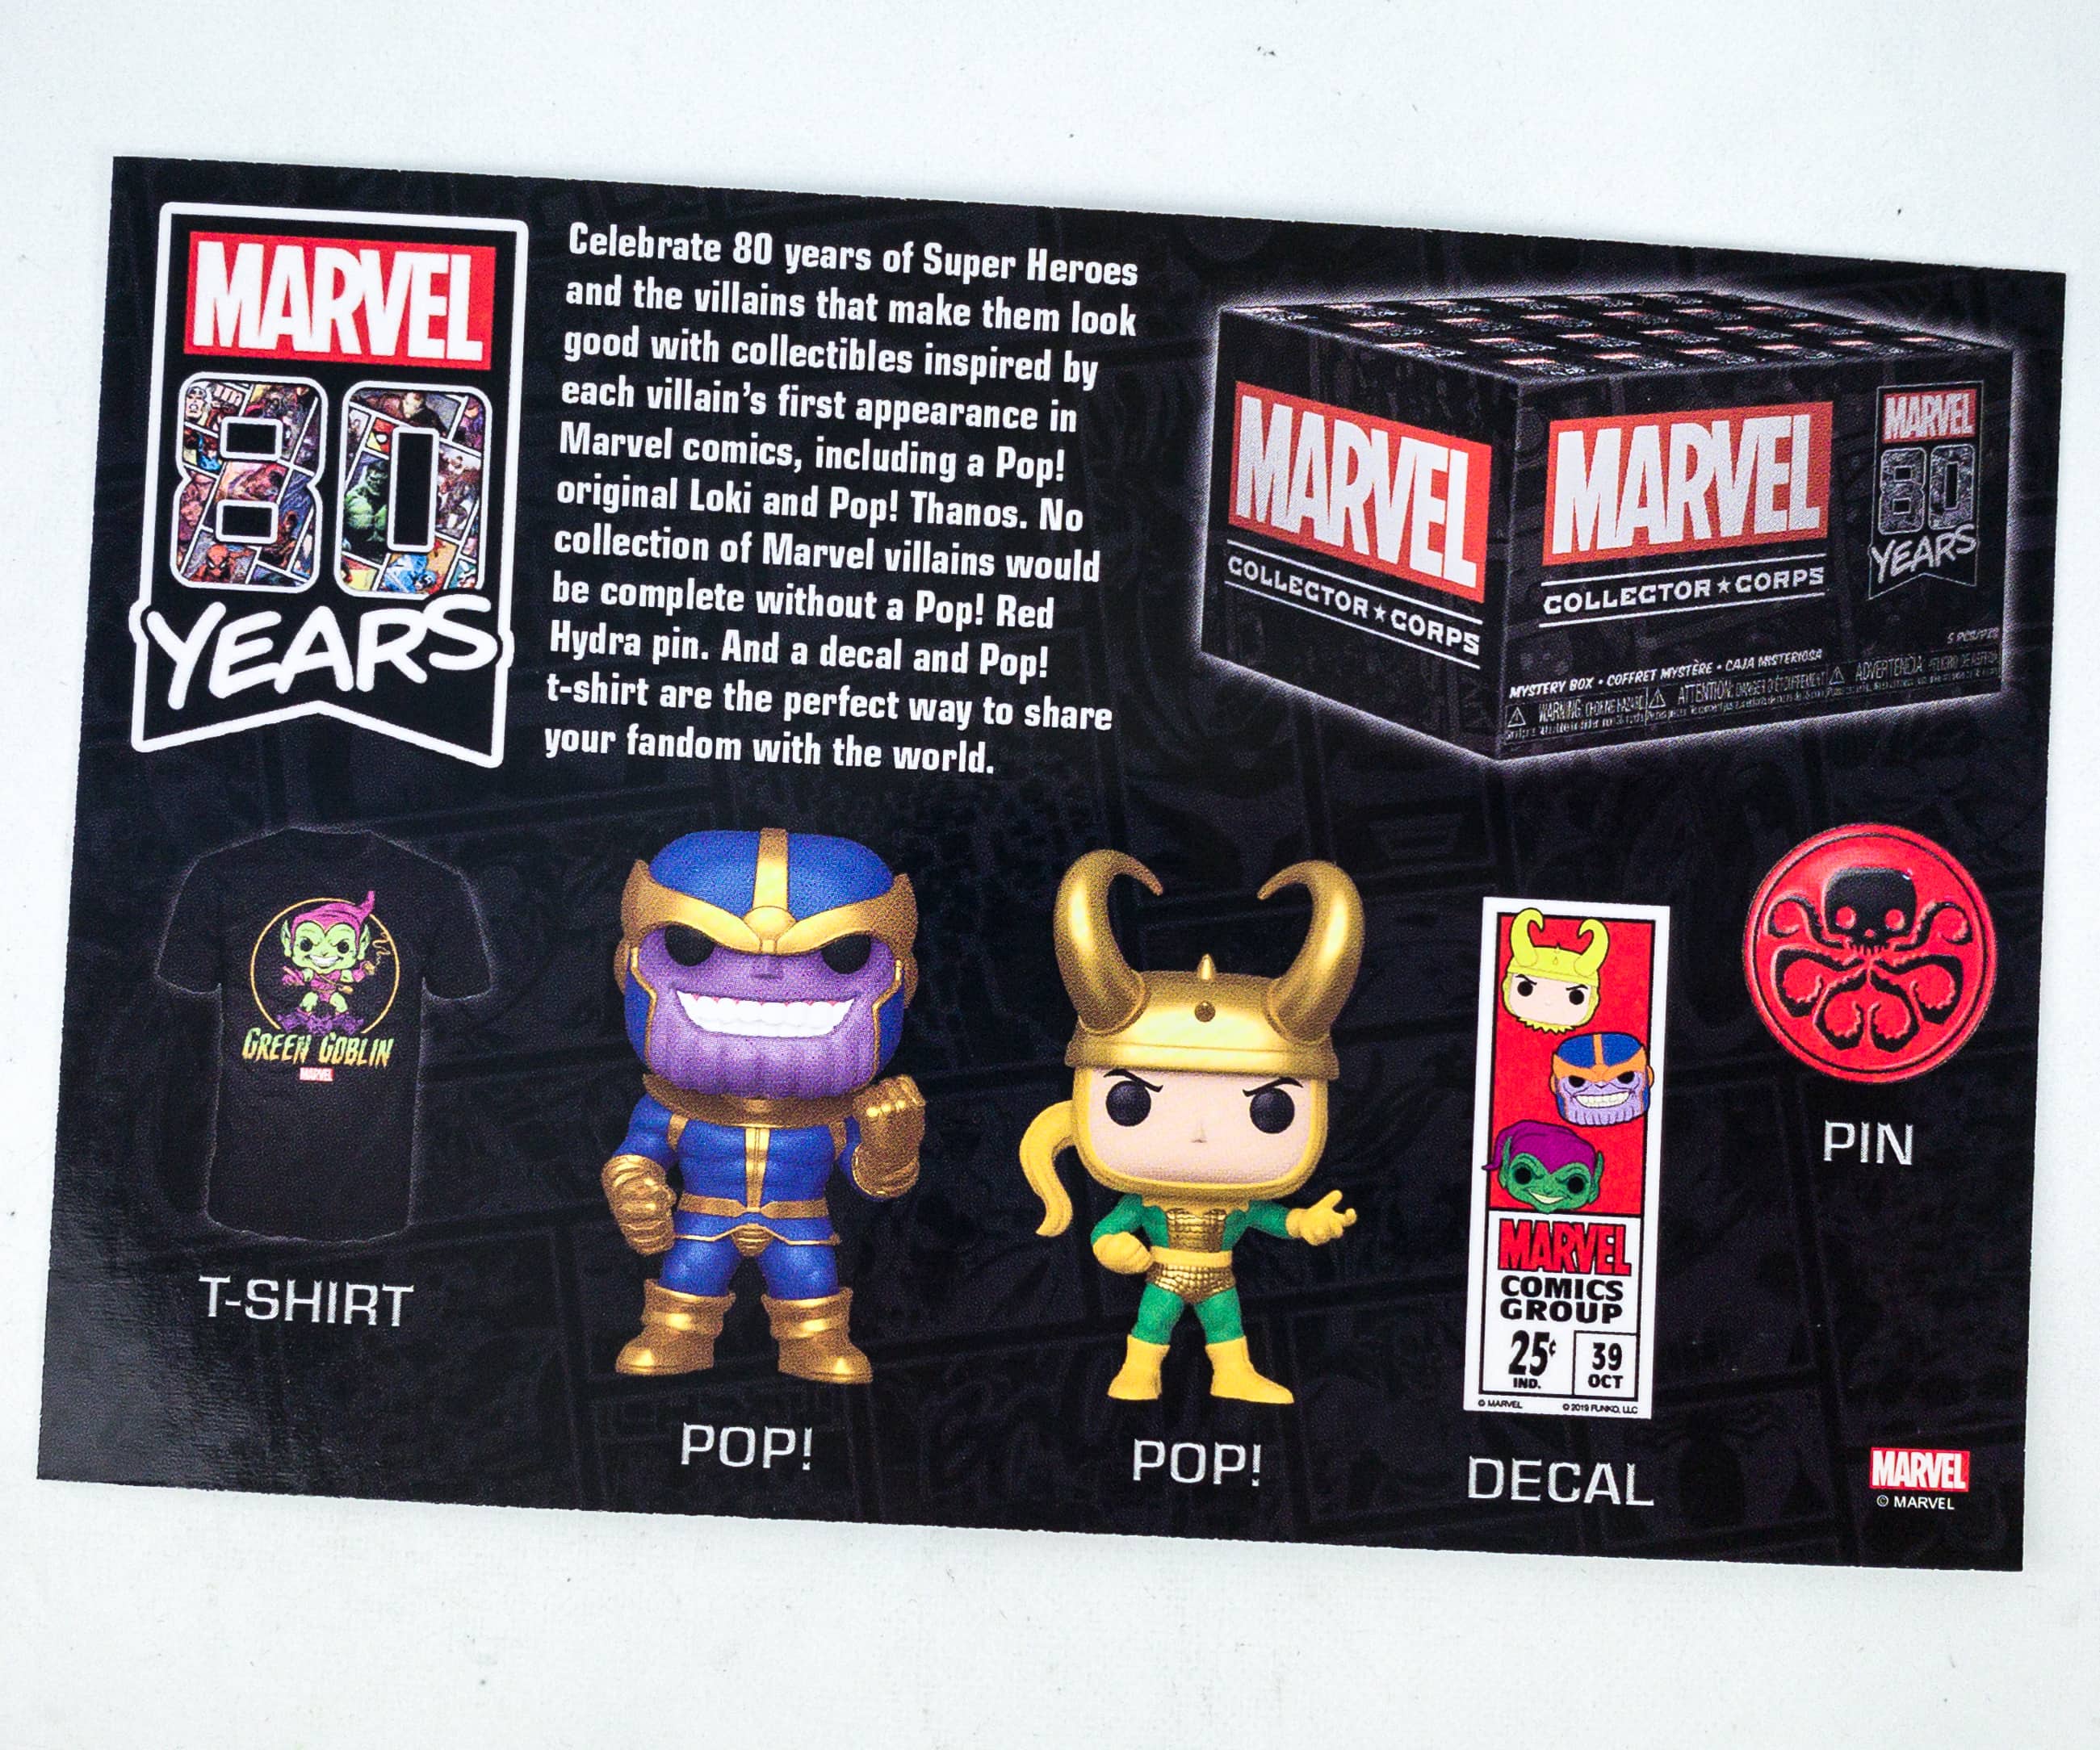 FUNKO POP MARVEL COLLECTOR CORPS FIRST APPEARANCE ENAMEL PIN AND PATCH New 